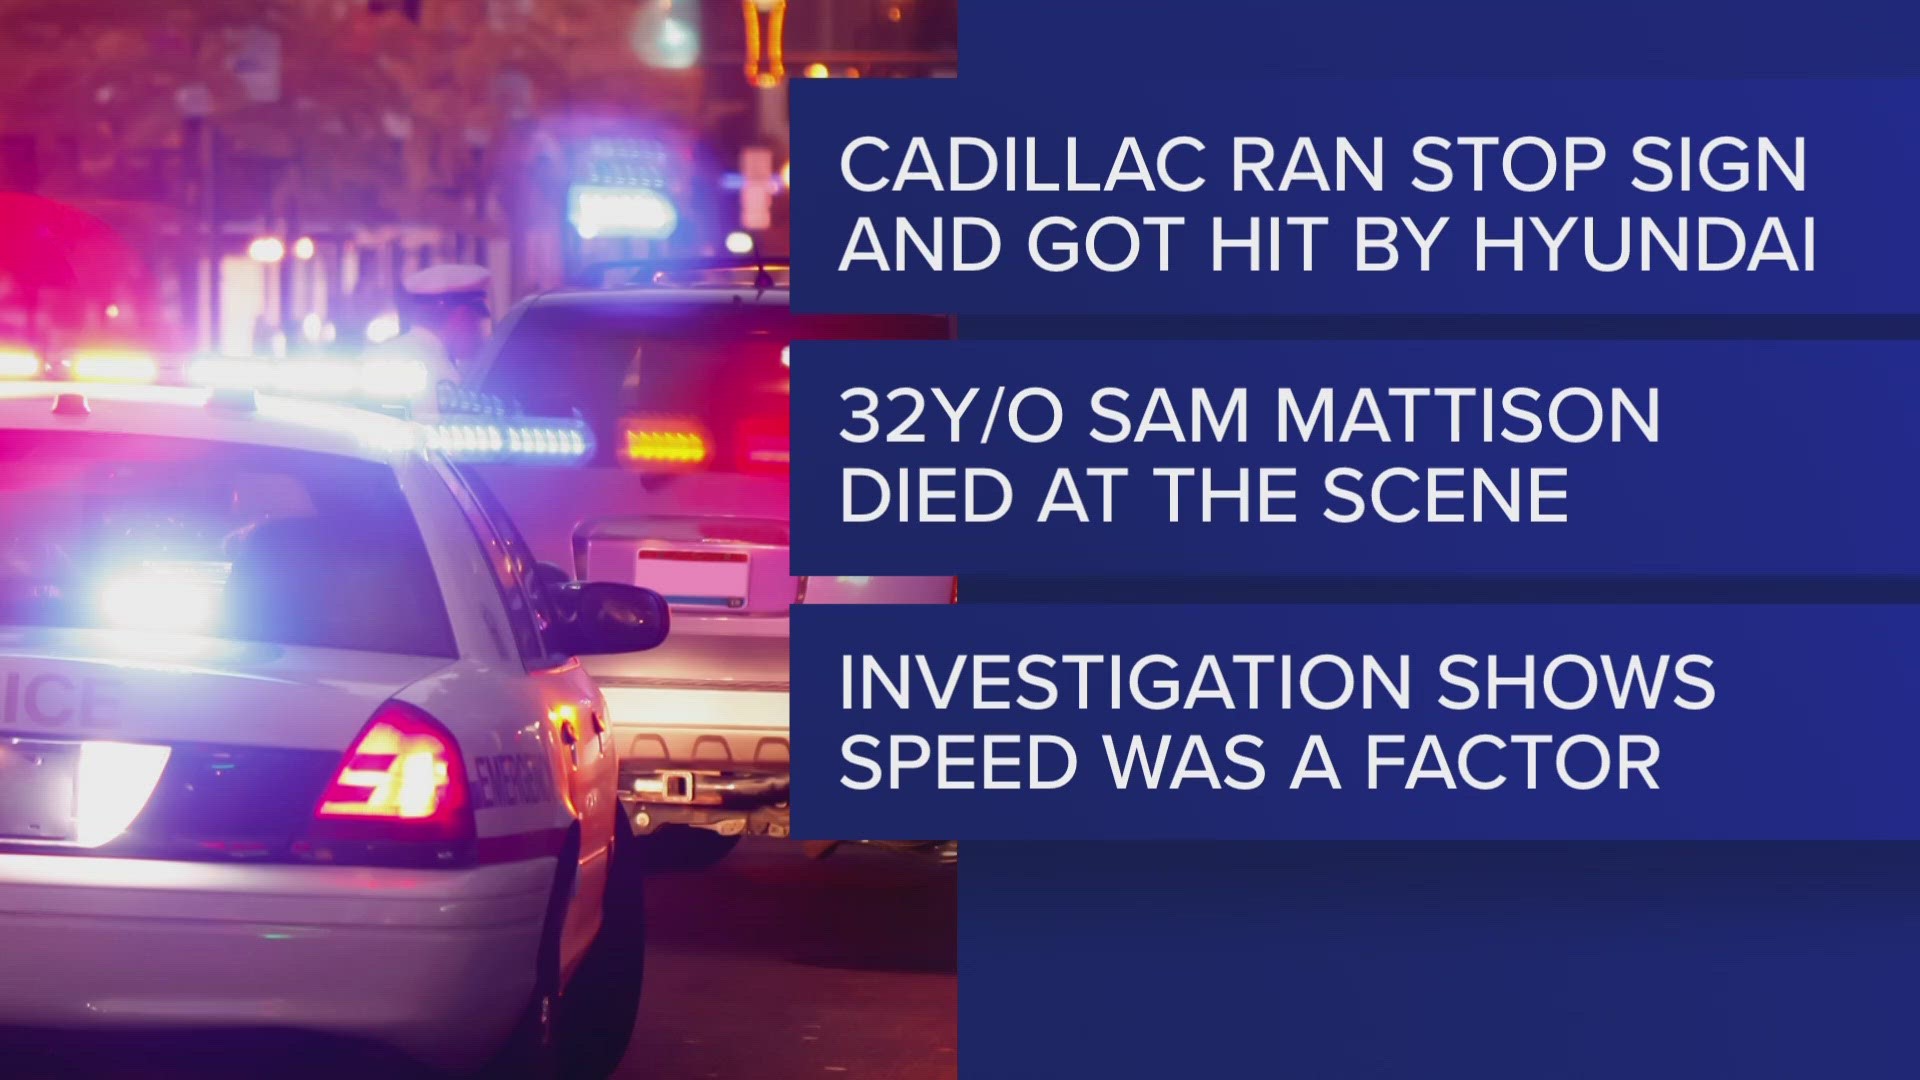 The driver of a car that ran a stop sign was killed after being struck by another vehicle.